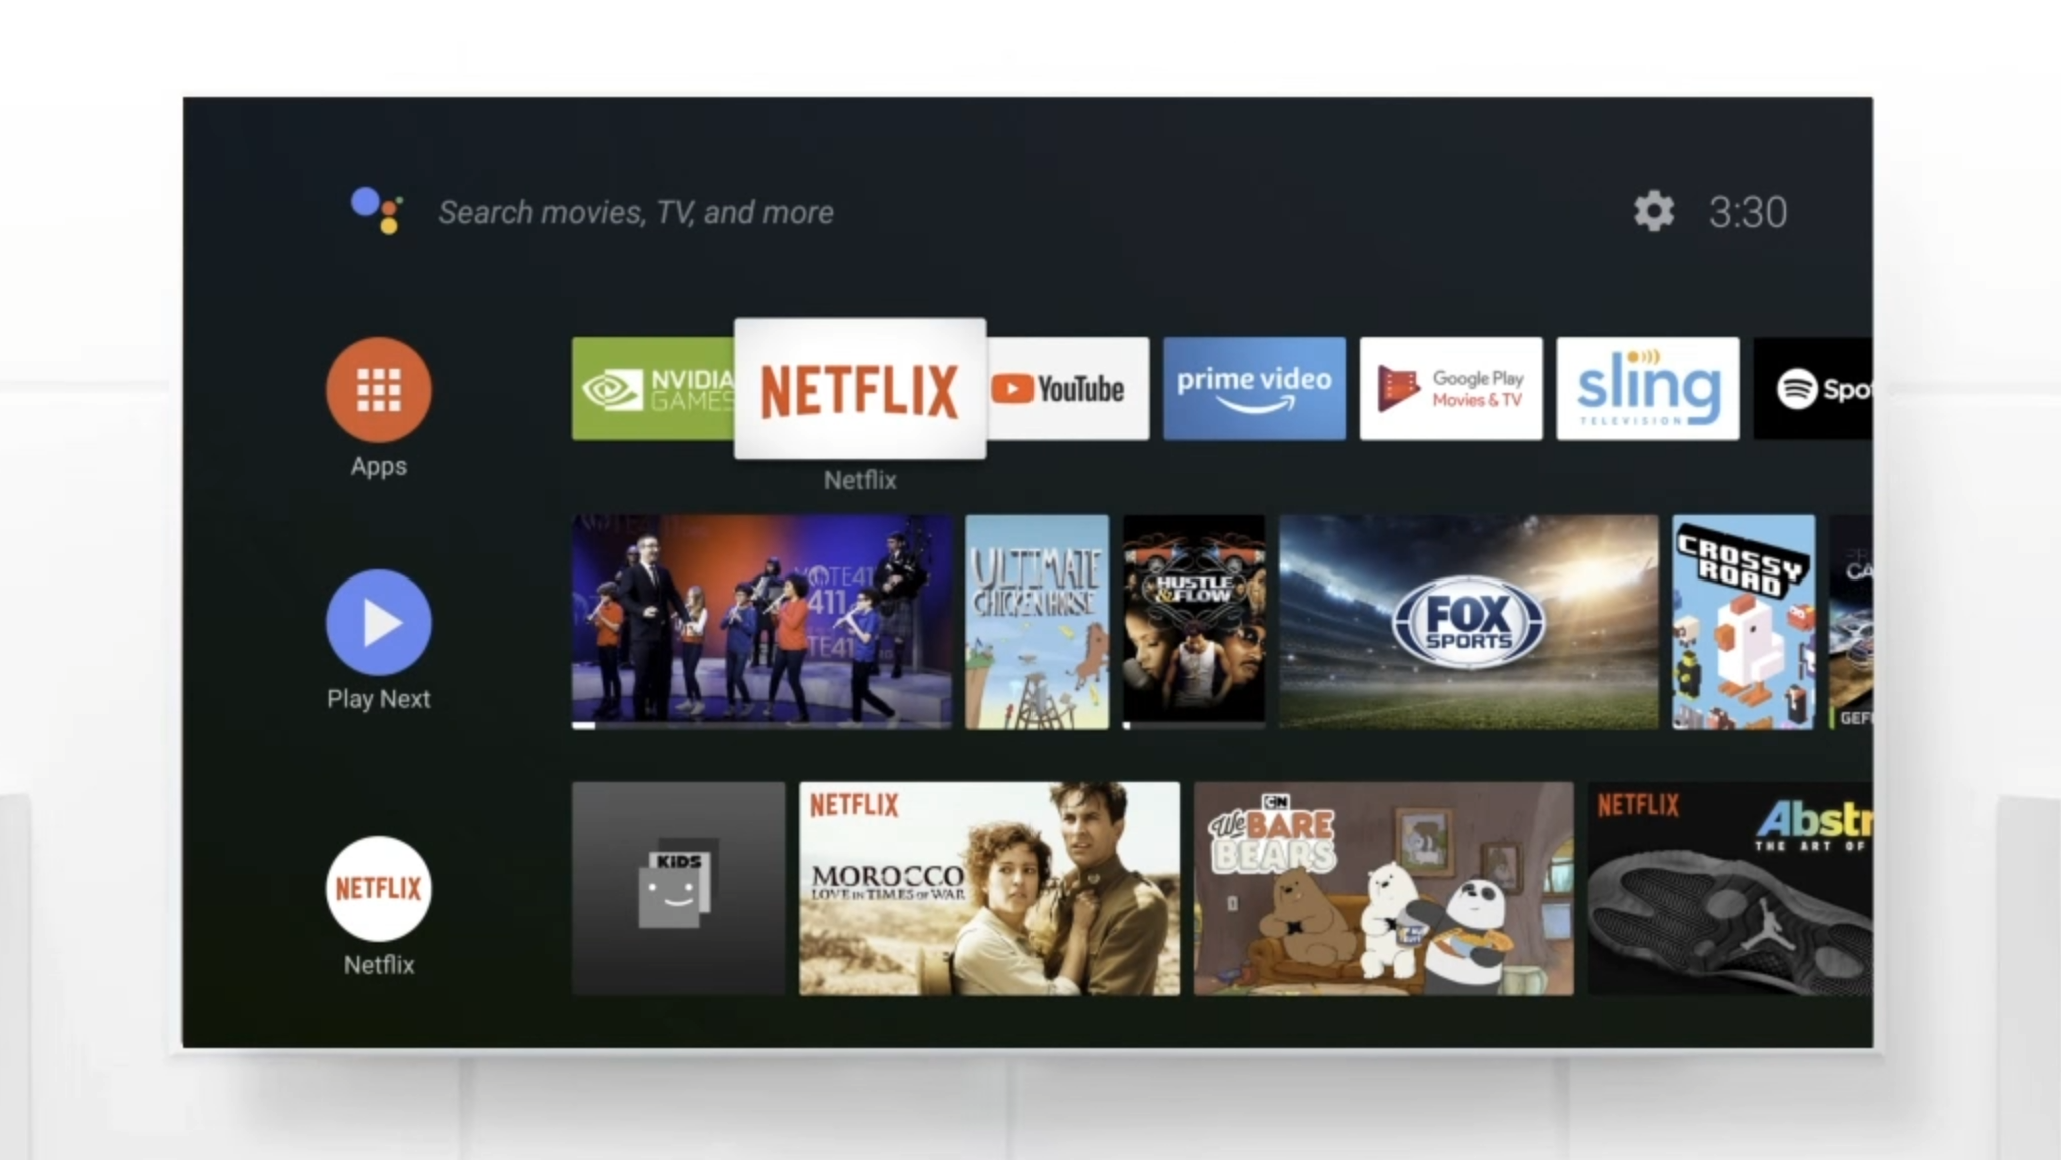 Here's an example of how the Android TV home screen looked like in a previous update.  (Image: Nvidia)